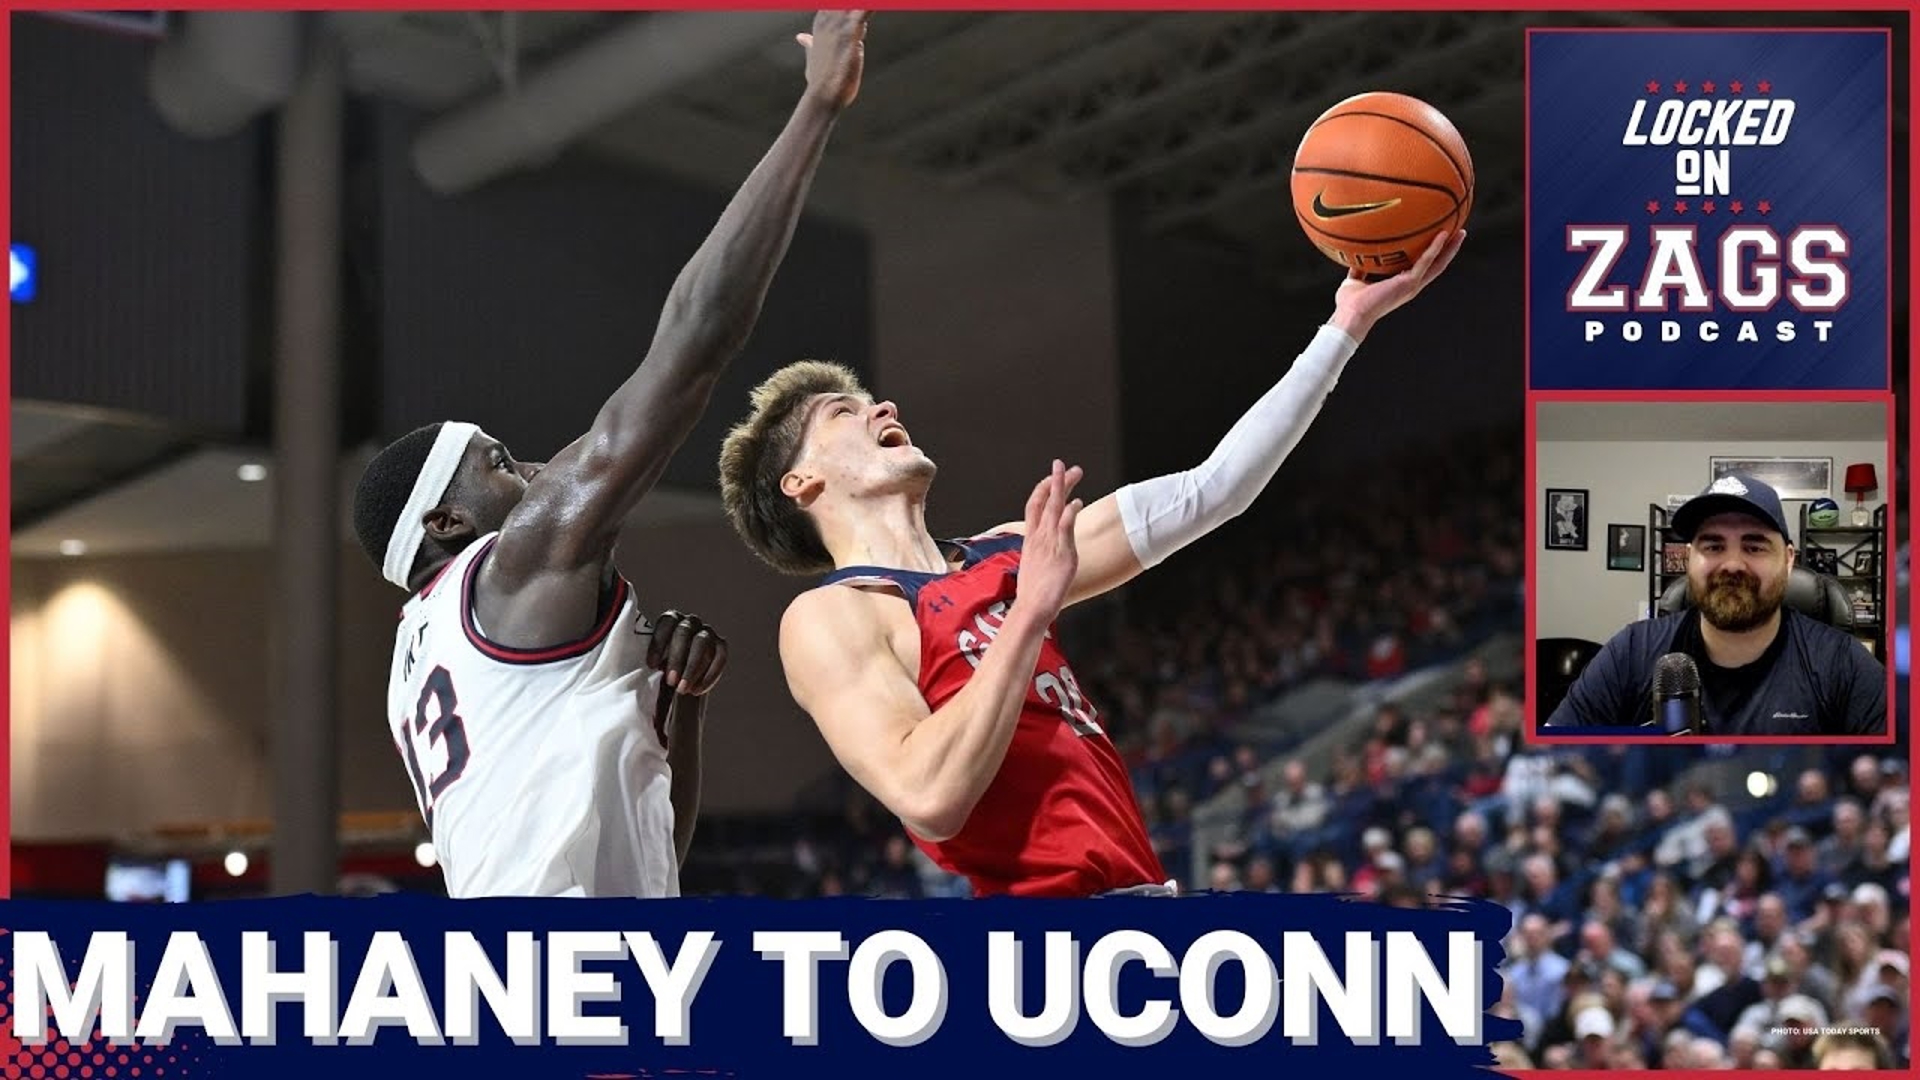 Mark Few and the Gonzaga Bulldogs will face Danny Hurley and the back-to-back national champion UConn Huskies at Madison Square Garden in December.